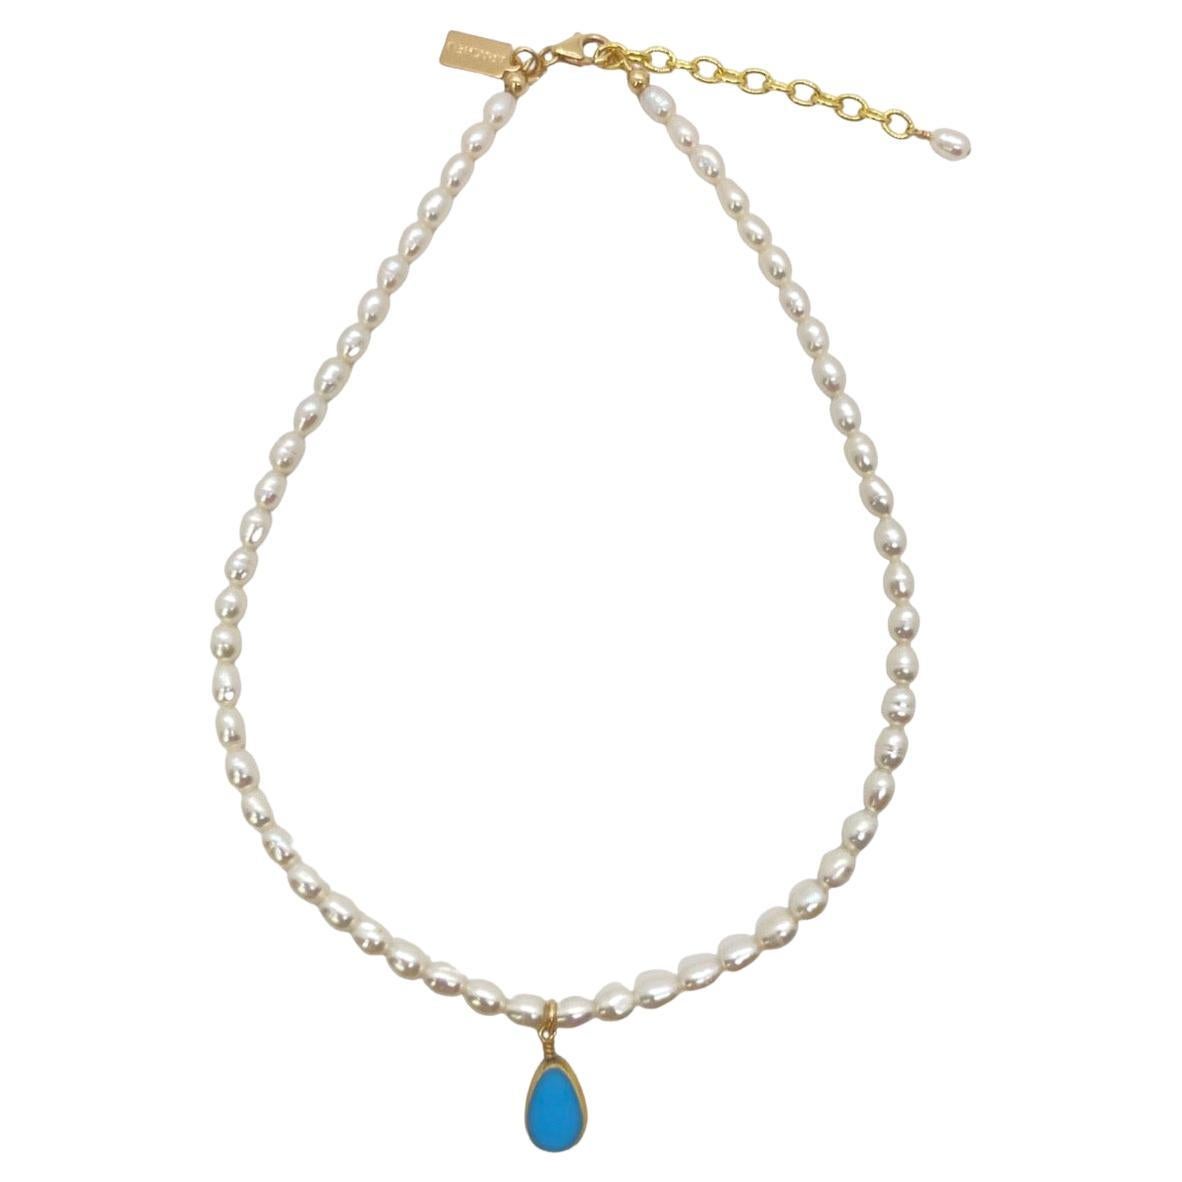 Babyblue Vintage German Glass Beads edged with 24K gold on Pearls, Alex Necklace